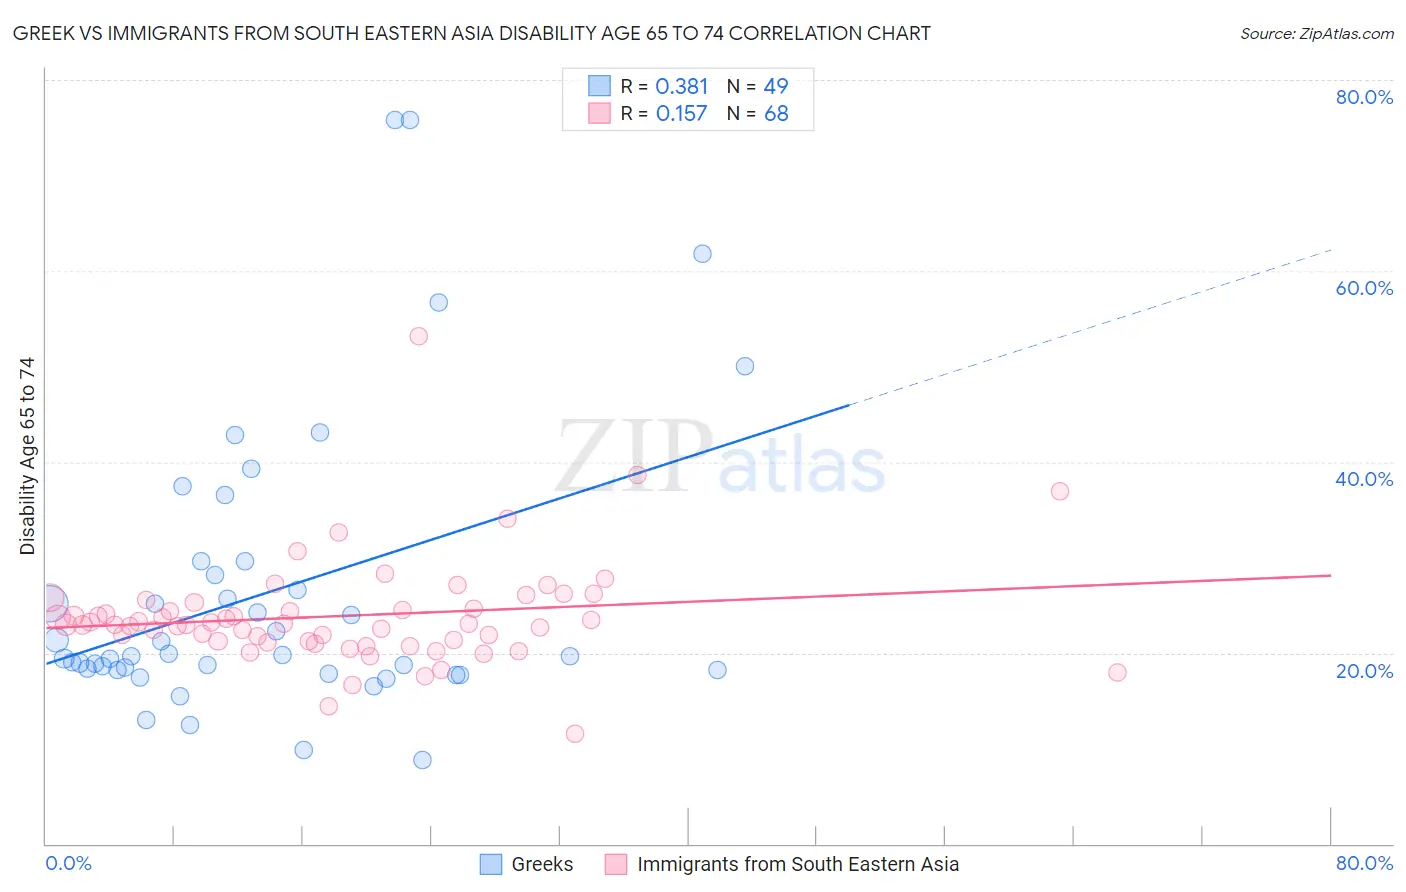 Greek vs Immigrants from South Eastern Asia Disability Age 65 to 74